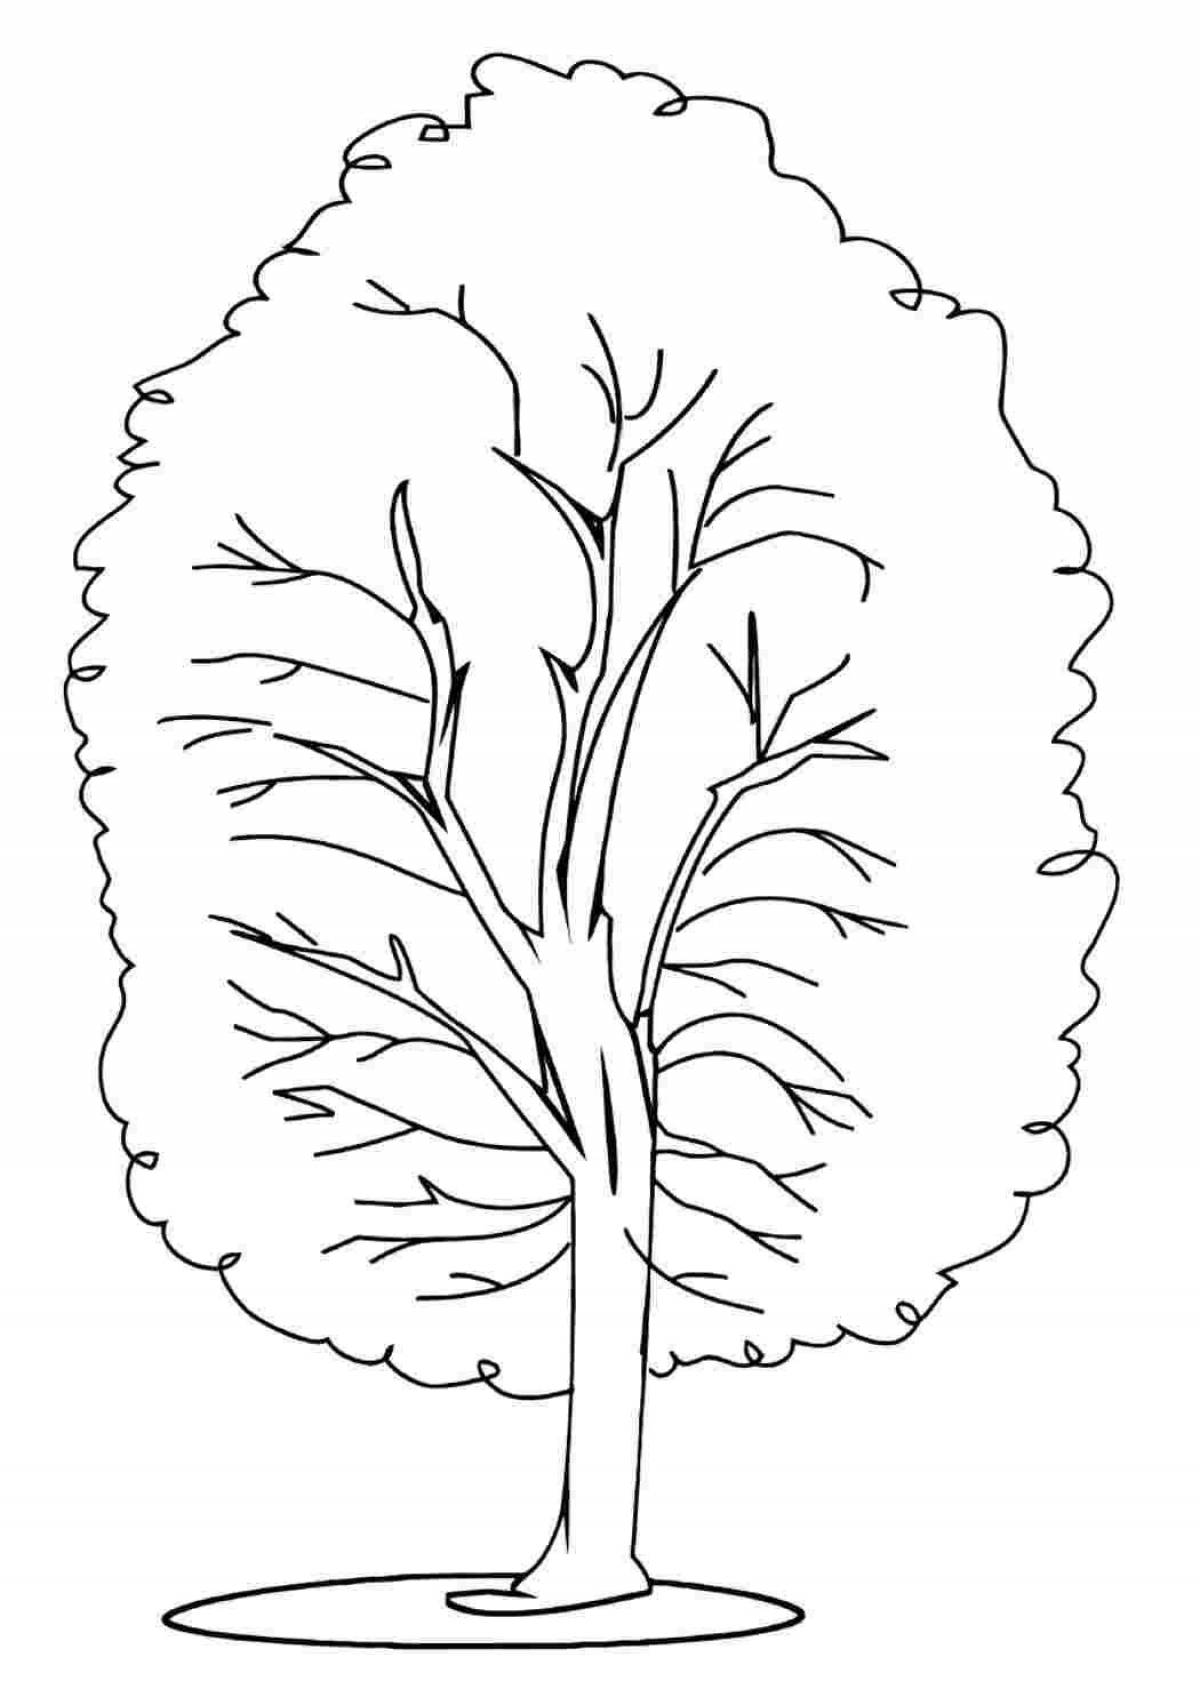 Adorable linden tree coloring page for beginners